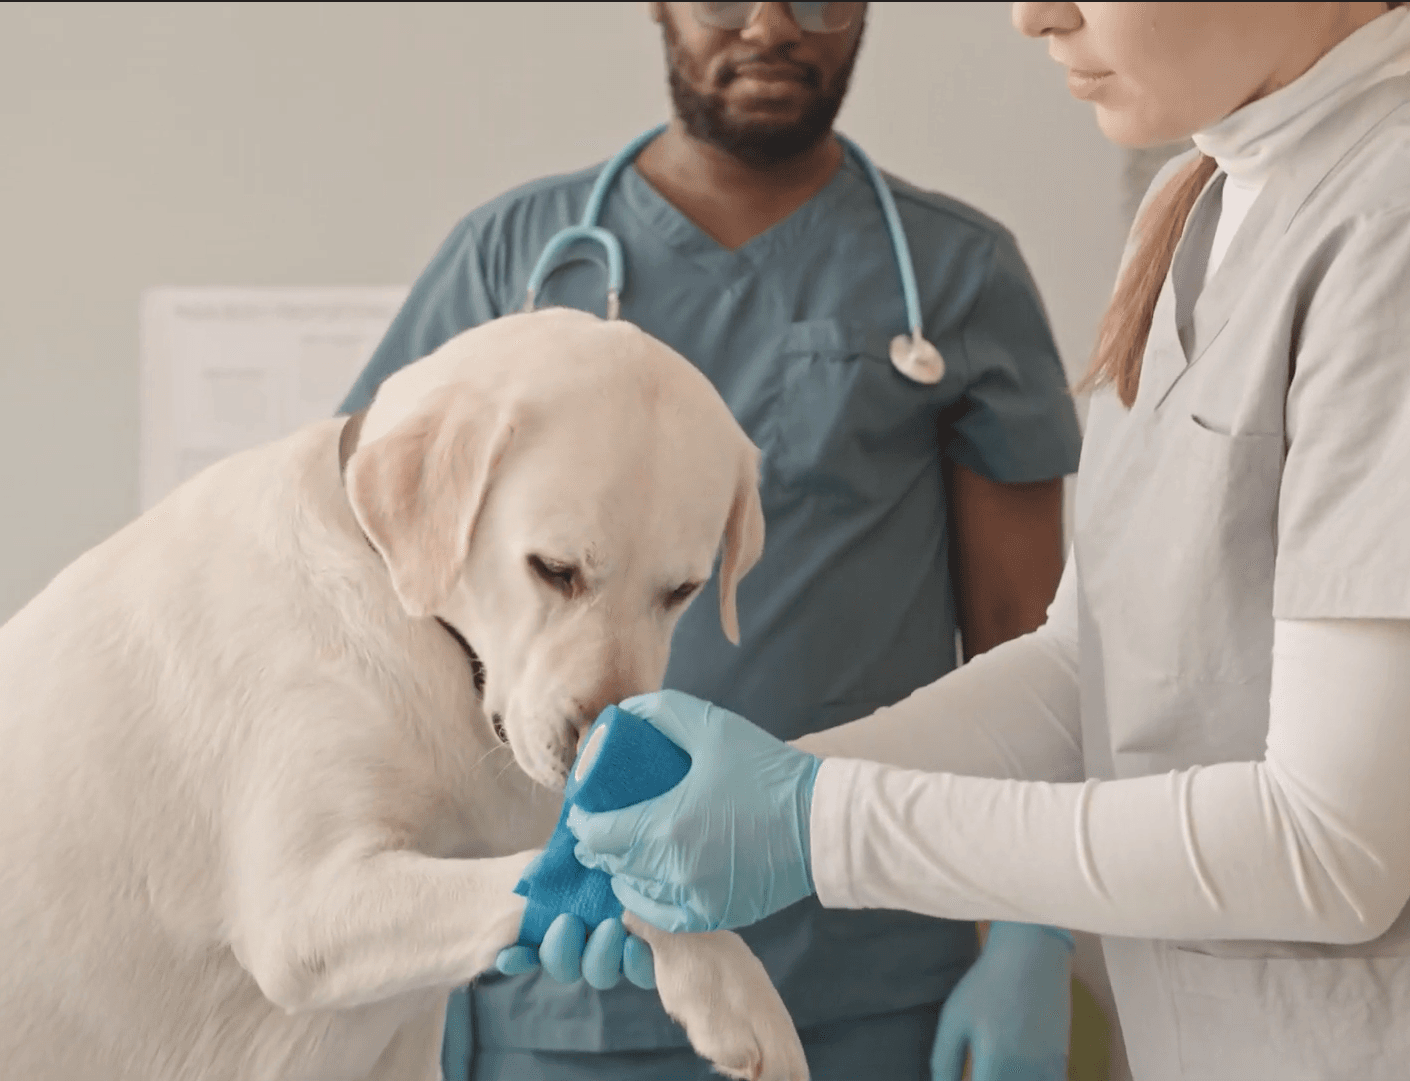 Video thumbnail showing a dog receiving treatment from a vet doctor.